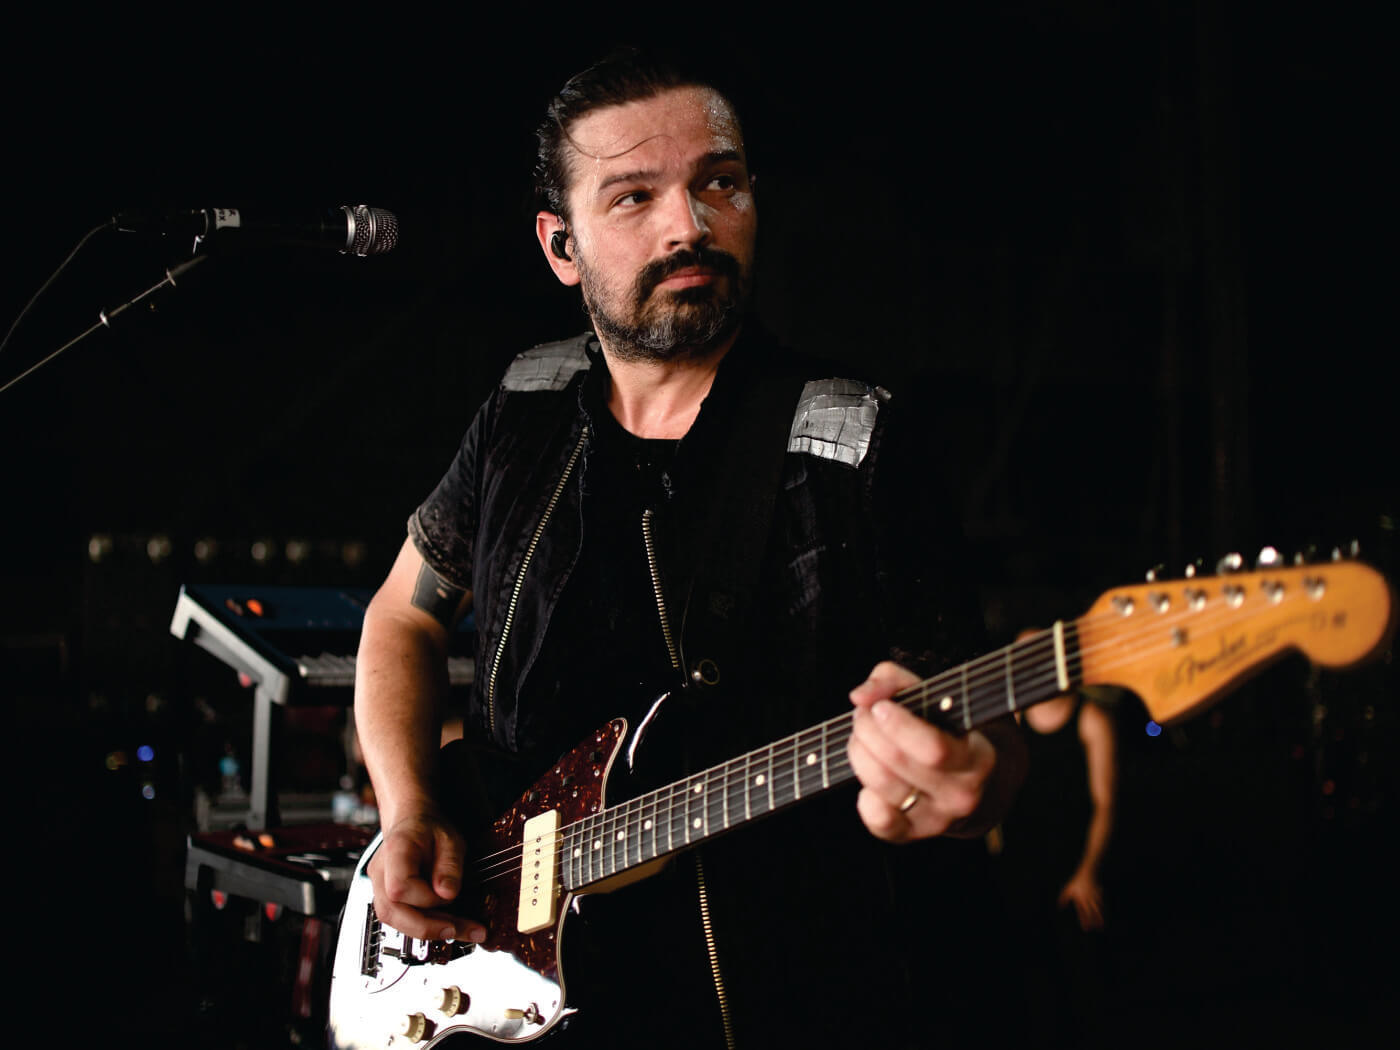 17-intriguing-facts-about-tomo-milicevic